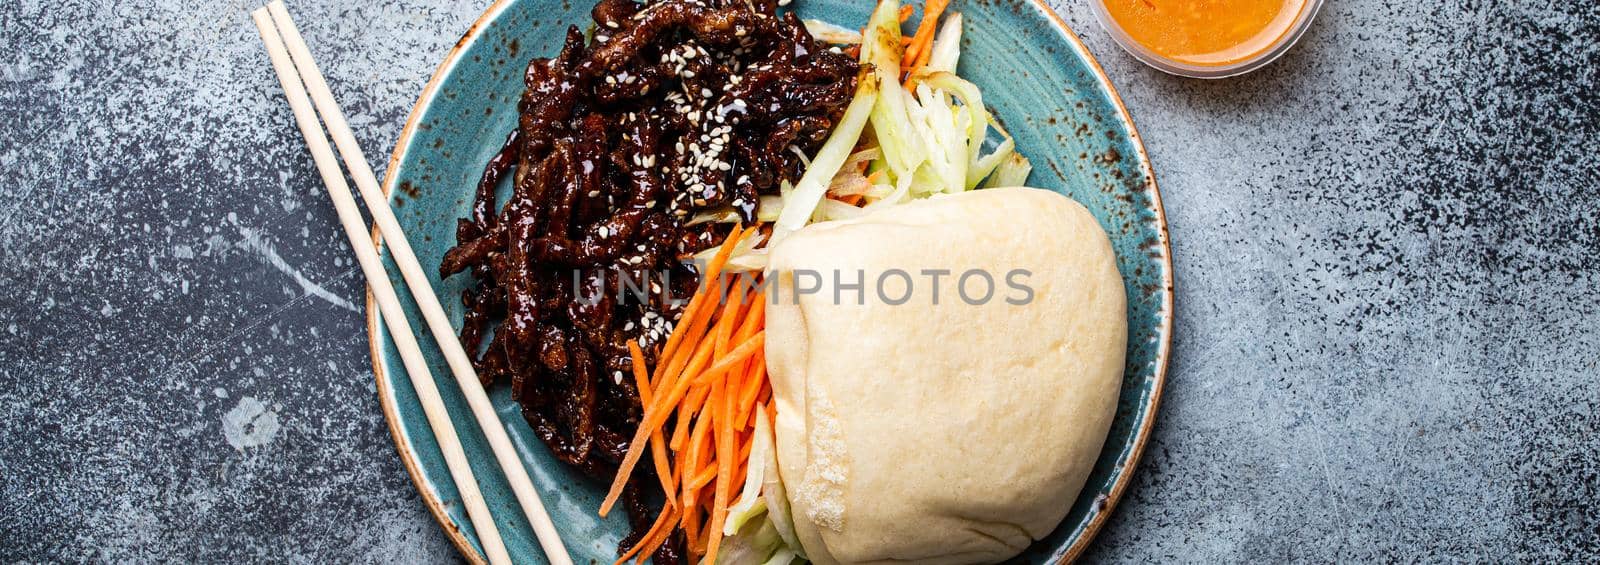 Chinese traditional dish sweet and sour deep fried glazed pork with vegetables and steamed bao bun on plate with on rustic concrete background top view, Asian meal with chopsticks